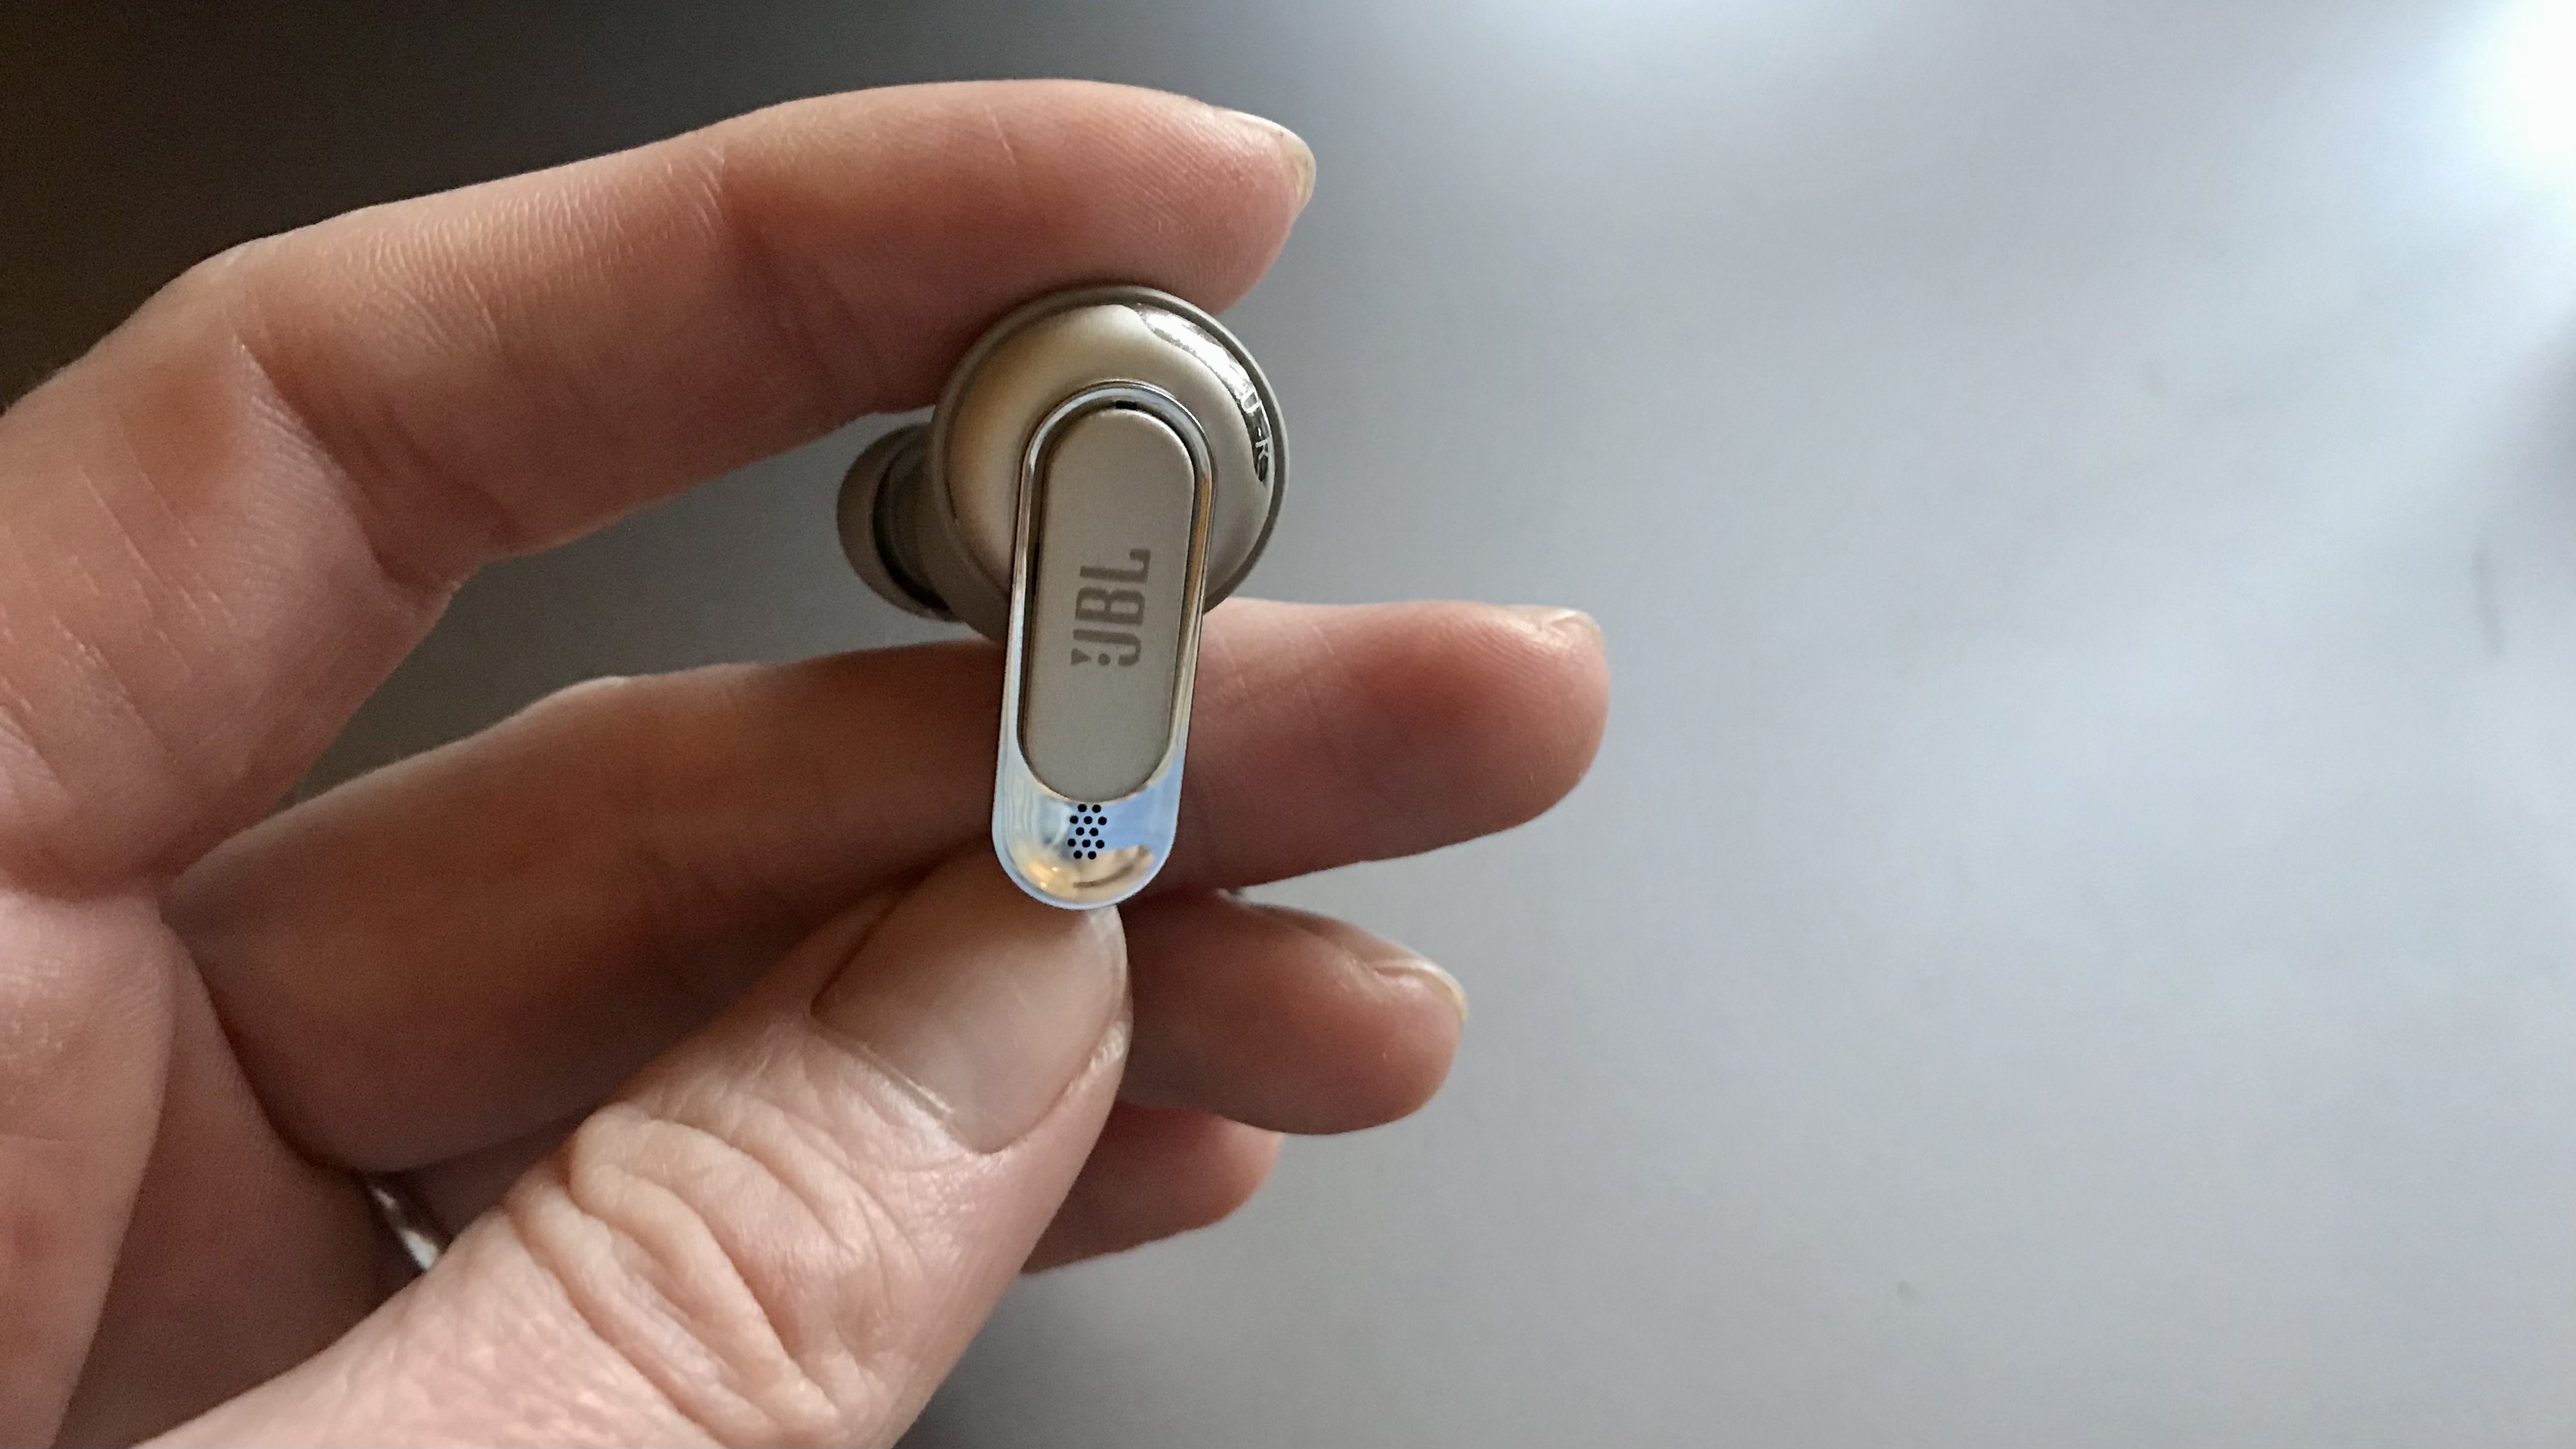 JBL Tour Pro 2 earbud held in a hand